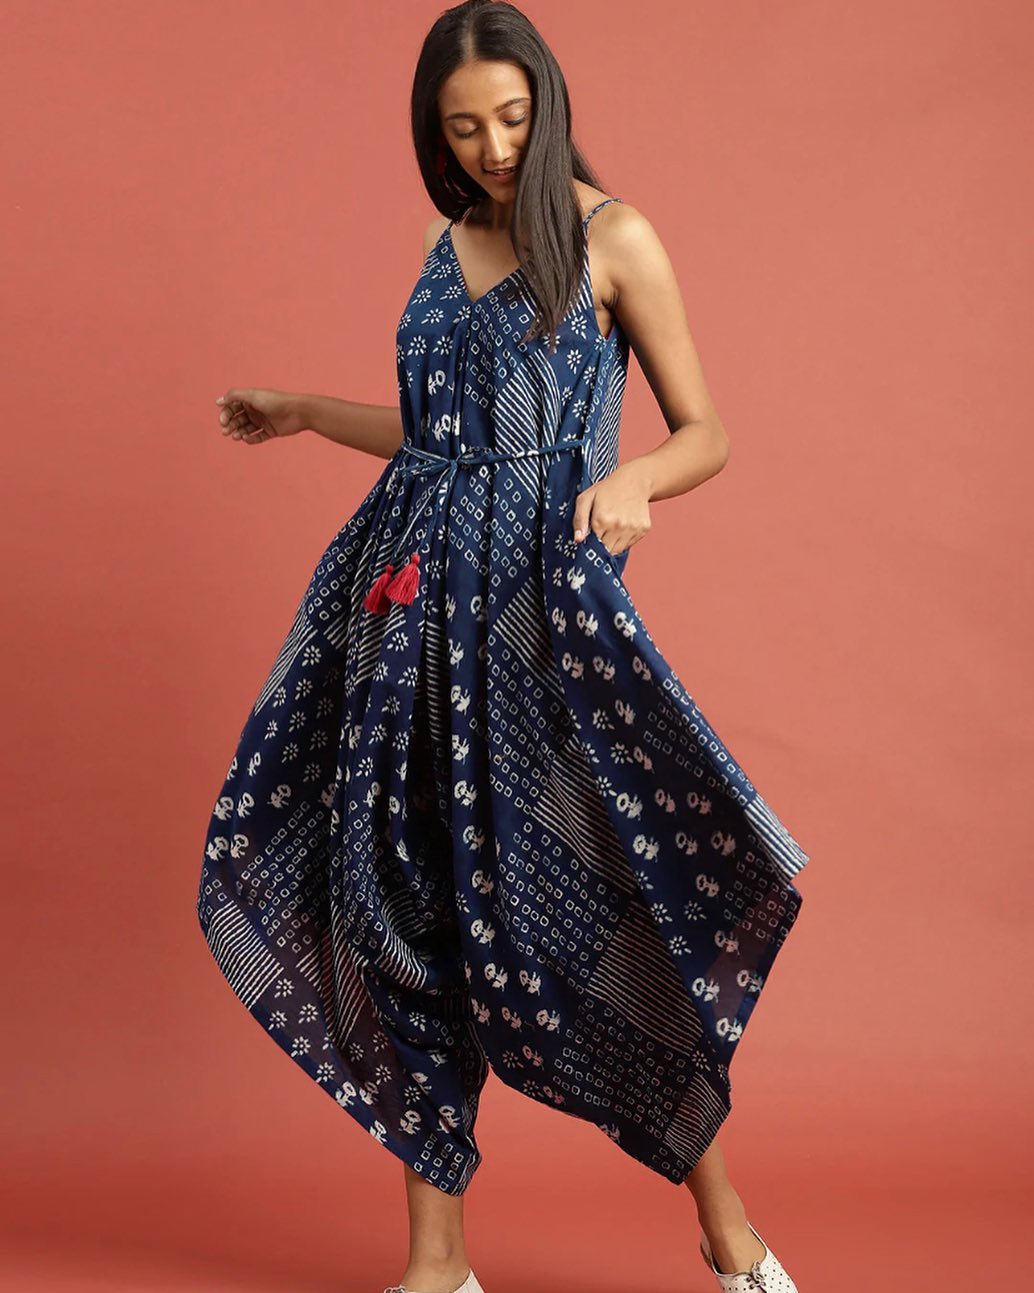 MYNTRA - Inspired by Indian crafts, check out this stylish handcrafted kurti by Taavi.
Look up product code: 9254703
The Myntra’s "Big Fashion Festival" from 16th - 22nd October, India’s Biggest Fashi...